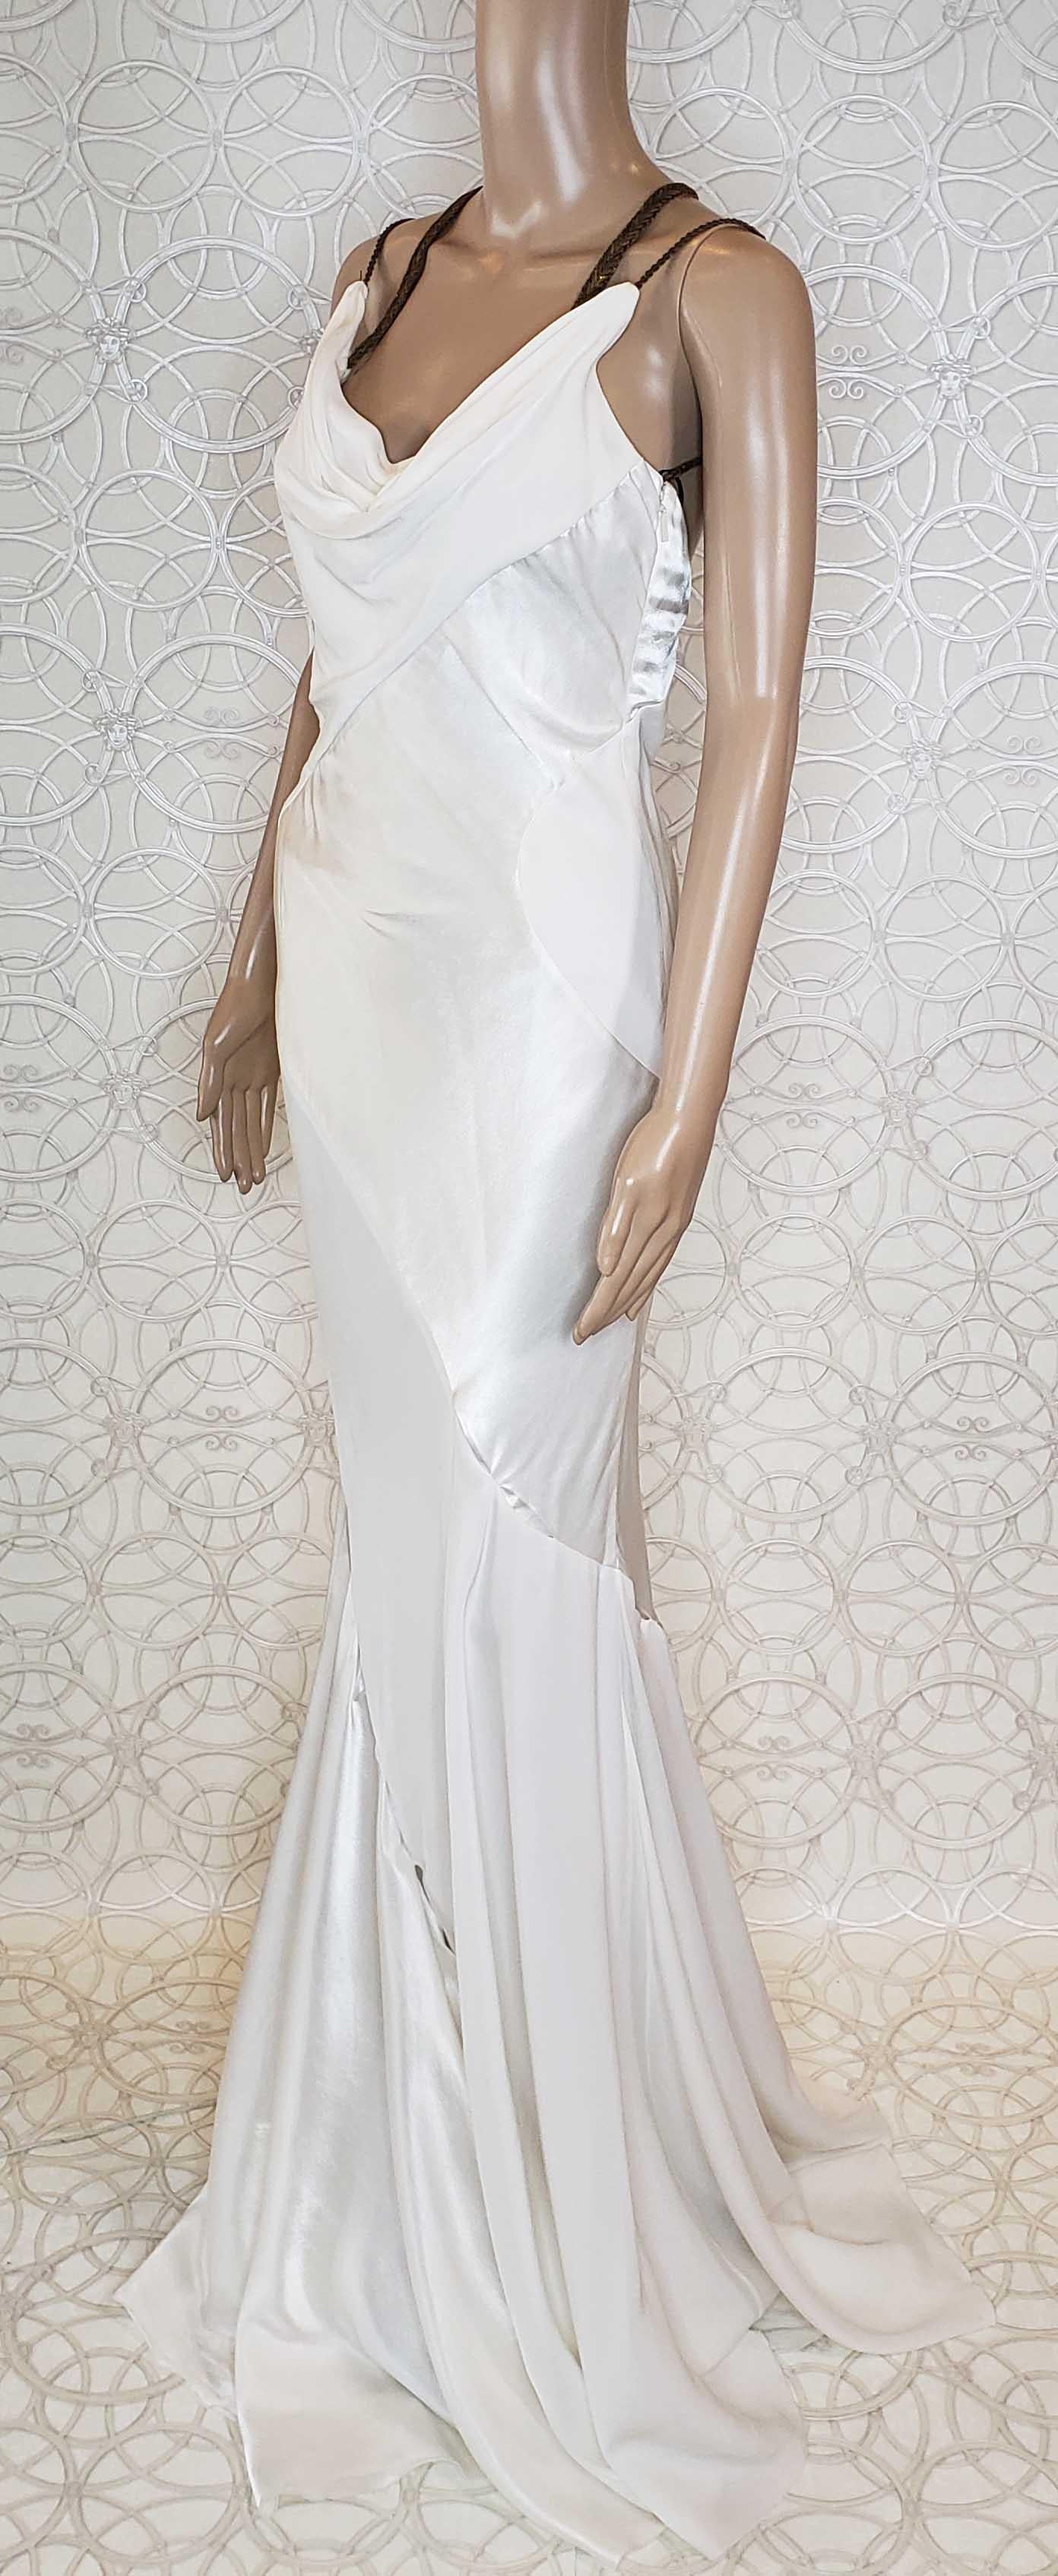 F/W 2014 Look # 51 NEW VERSACE WHITE GOWN DRESS as seen on Heidi 38 - 2 For Sale 2